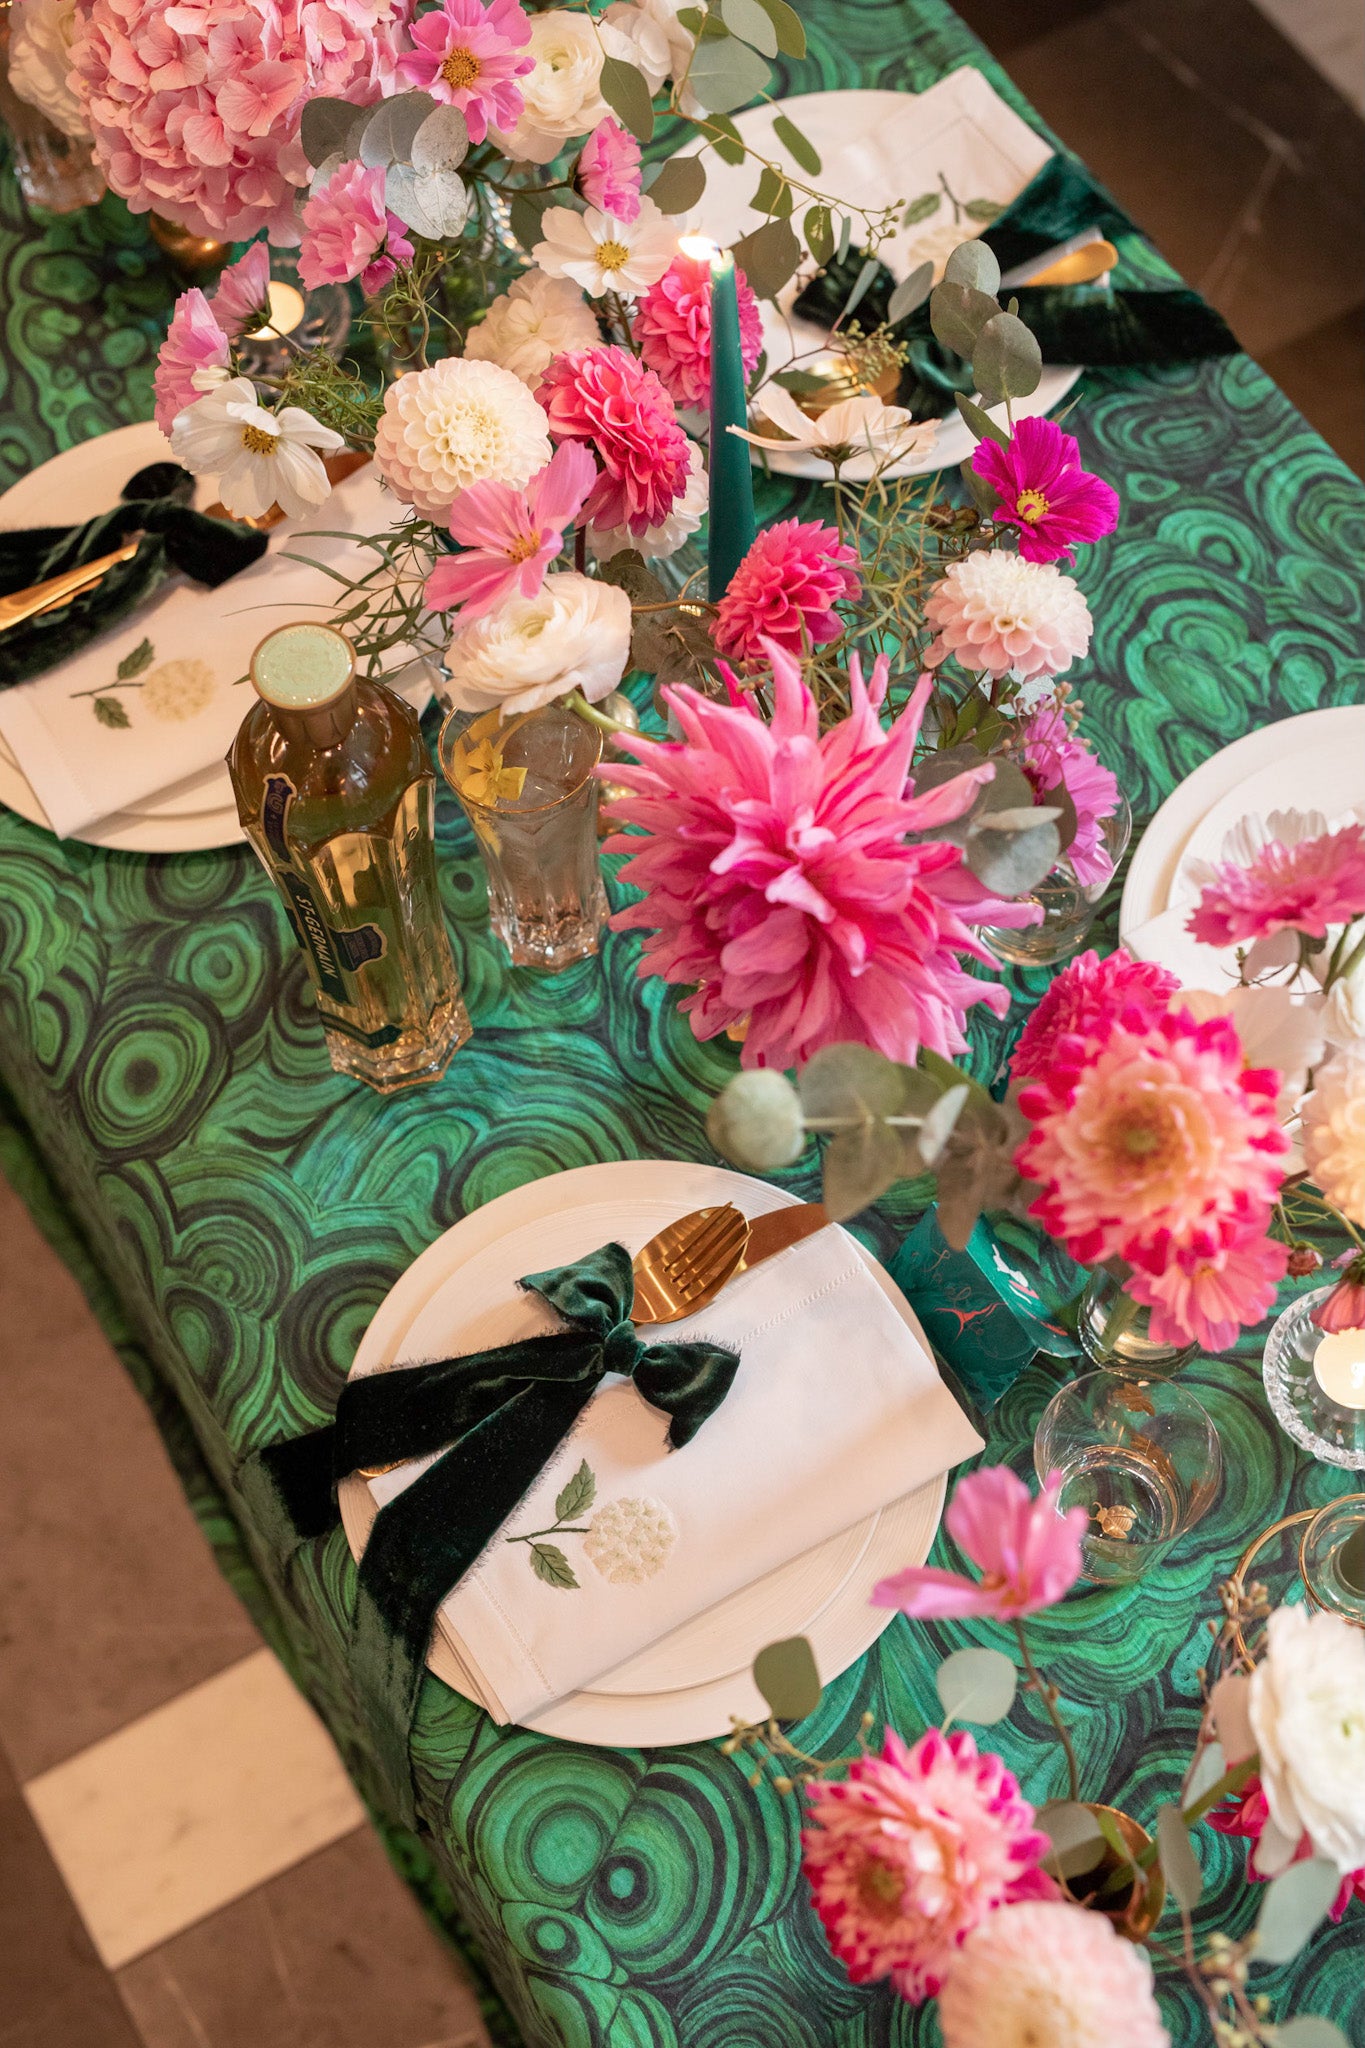 Pink and green glamorous tablescape for autumn